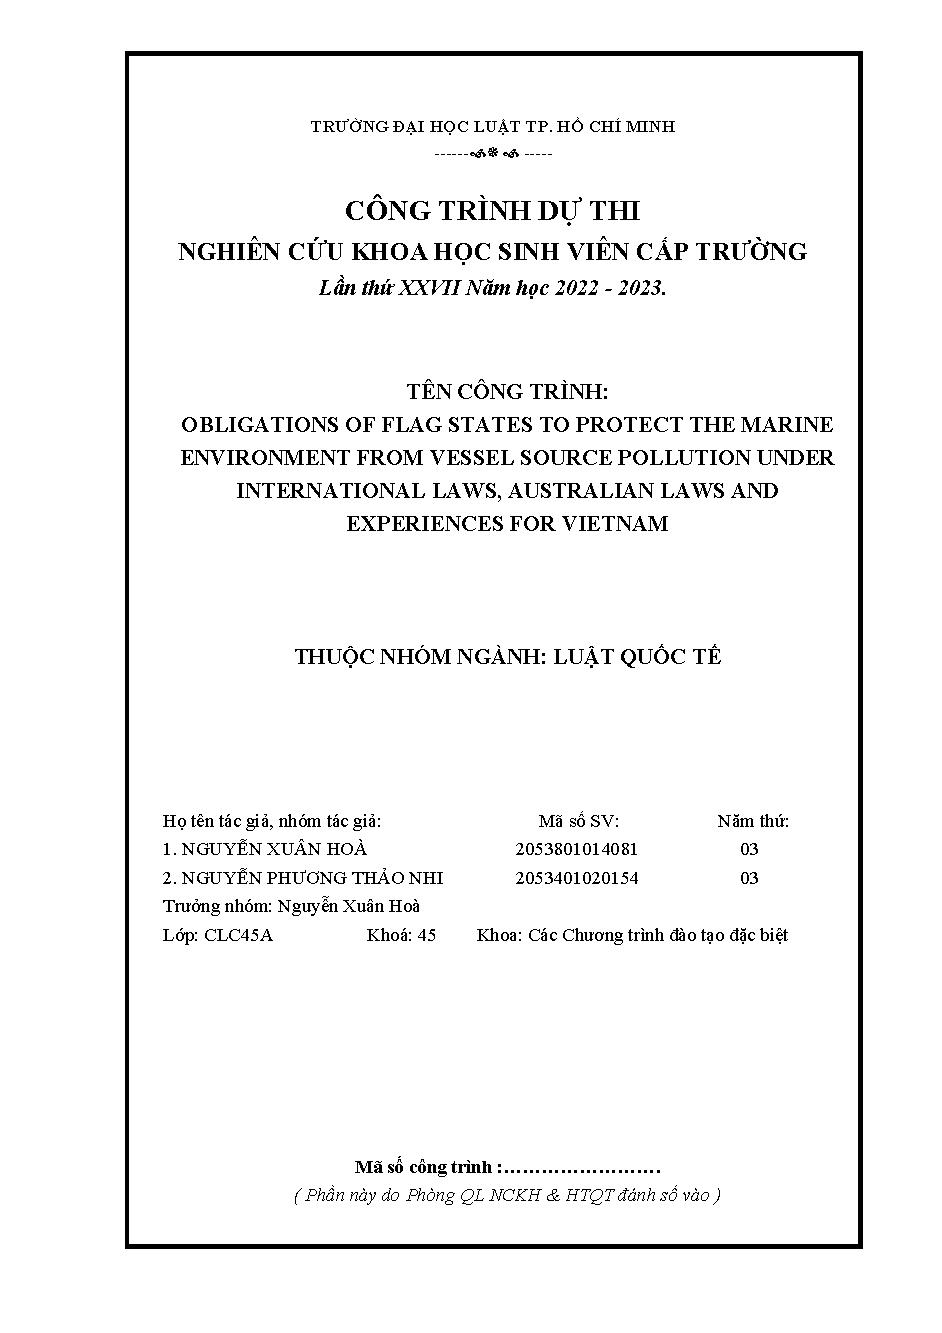 Obligations of flag states to protect the marine environment from vessel source pollution under interrnational laws, 
Australian laws and experiences for Vietnam